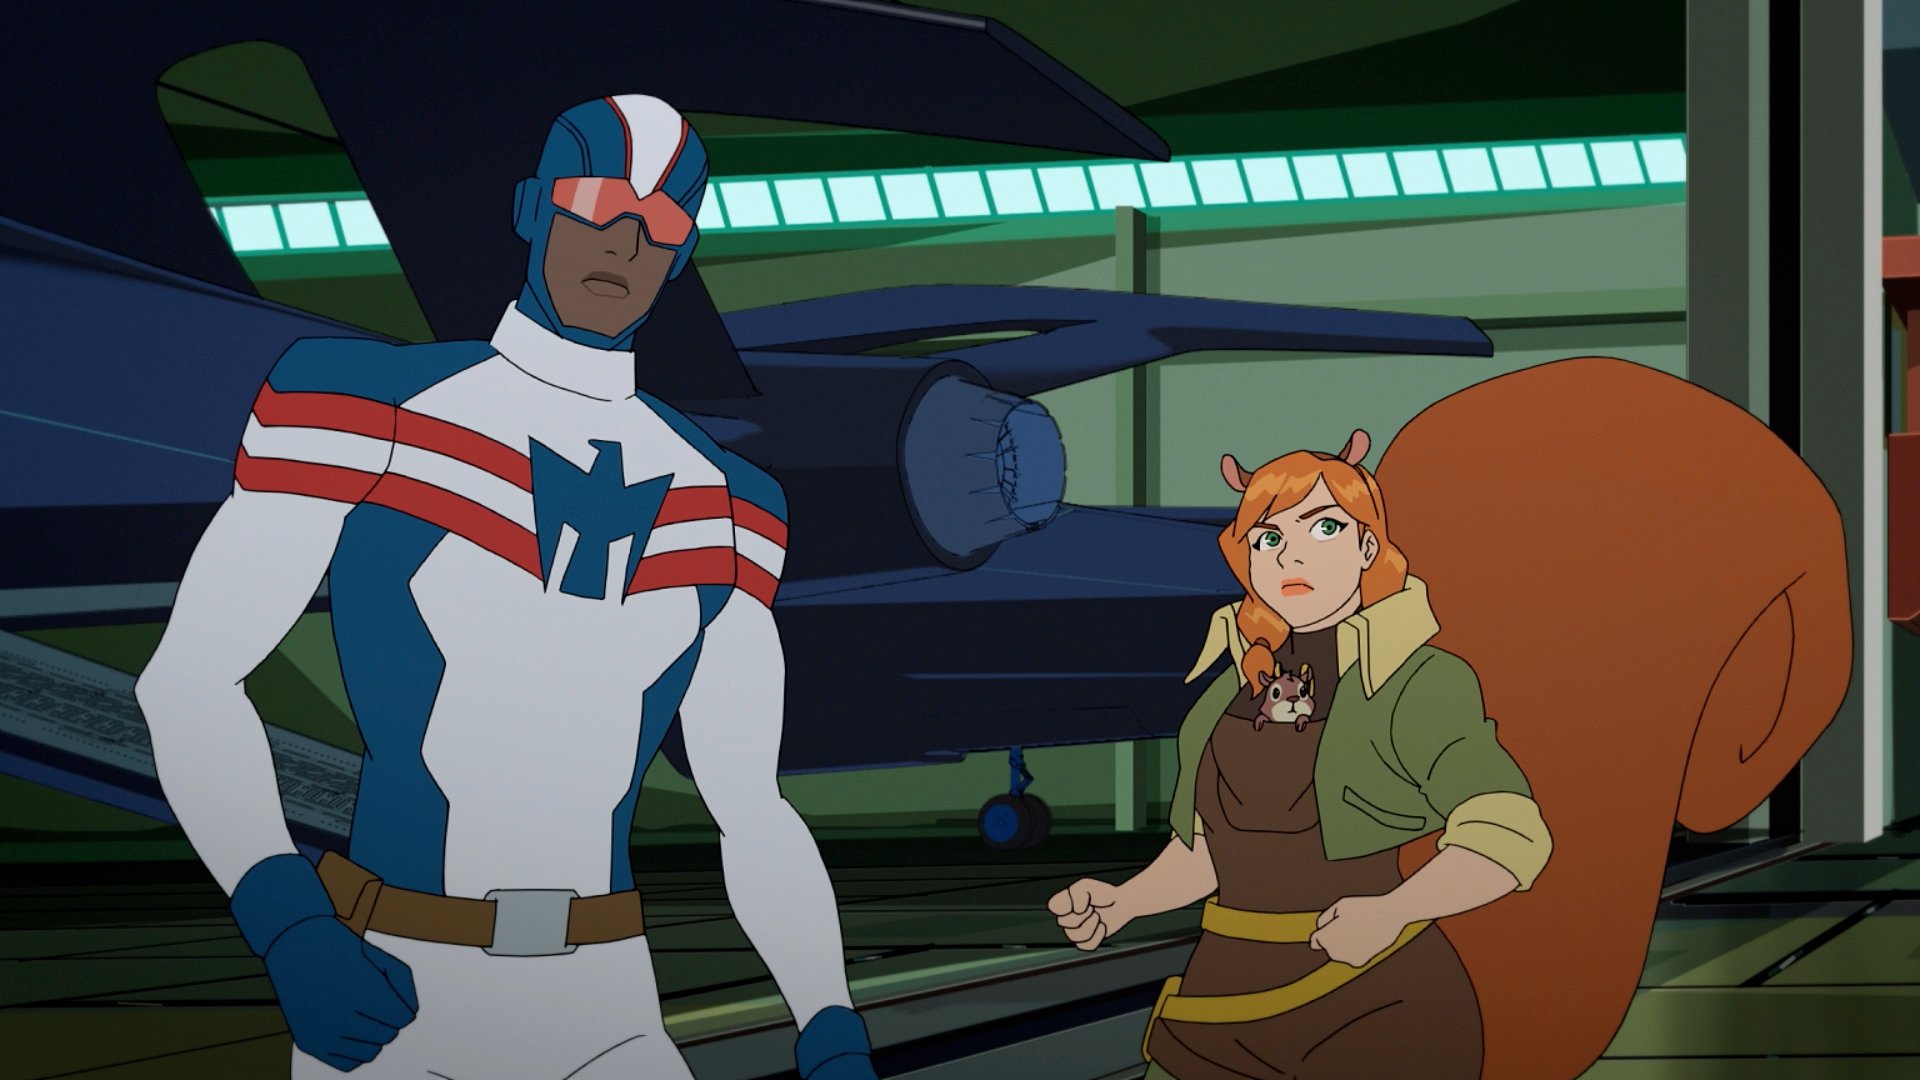 Patriot, Tippy-Toe, and Squirrel Girl in 'Marvel Rising: Secret Warriors'